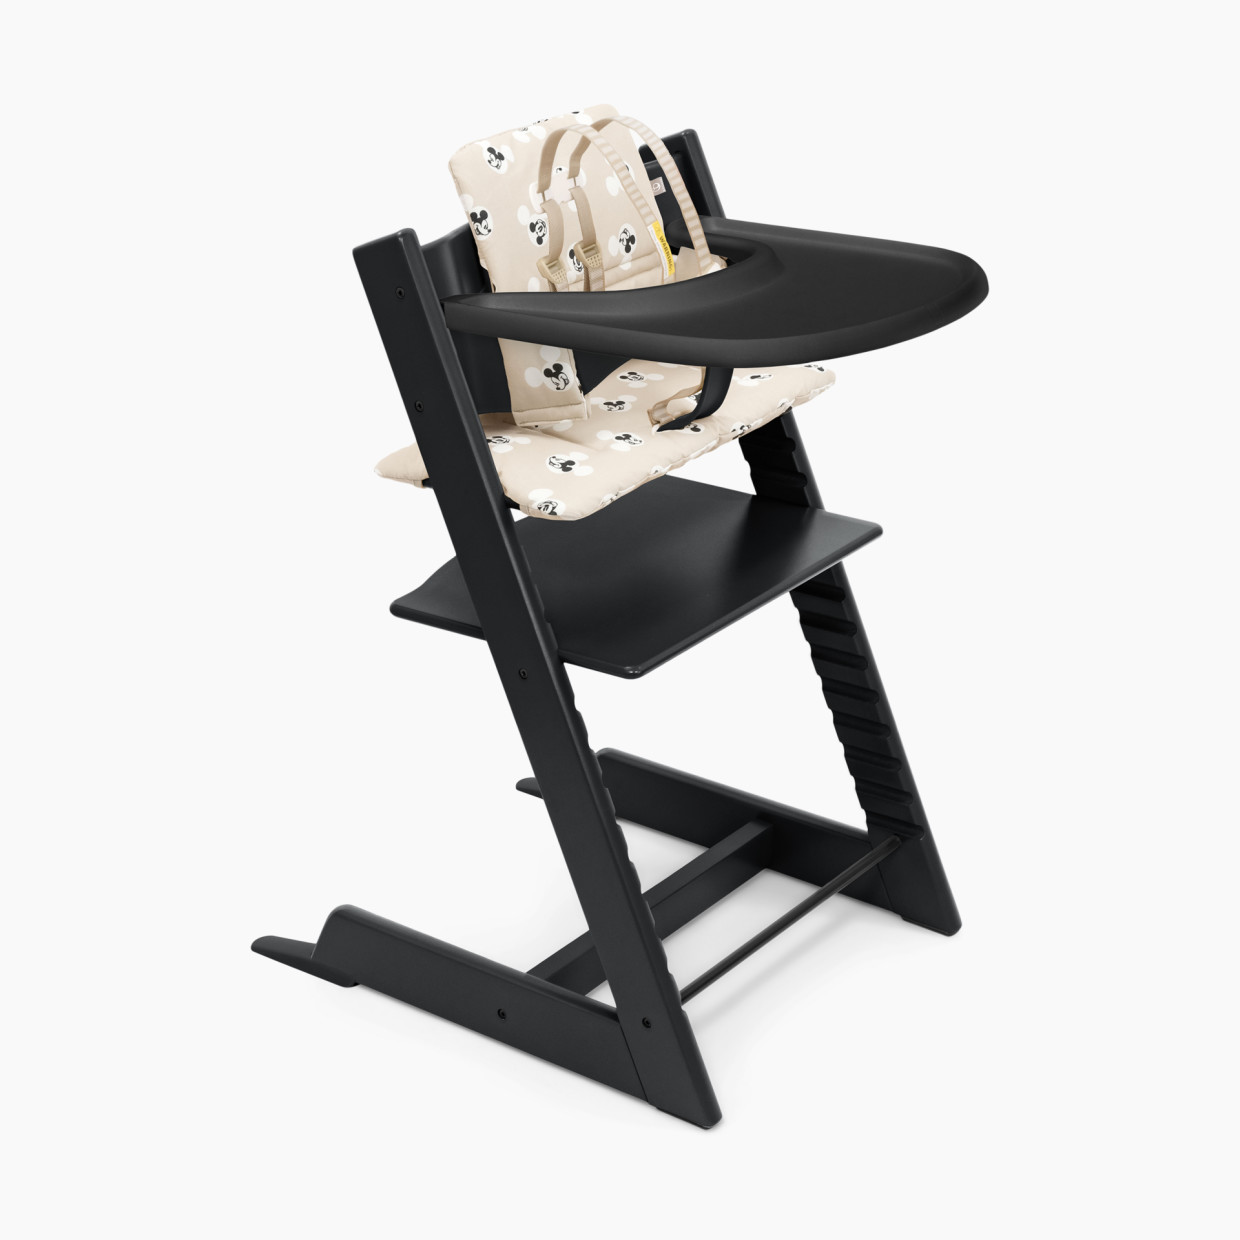 Stokke Tripp Trapp High Chair Complete - Black, Signature Mickey Cushion.